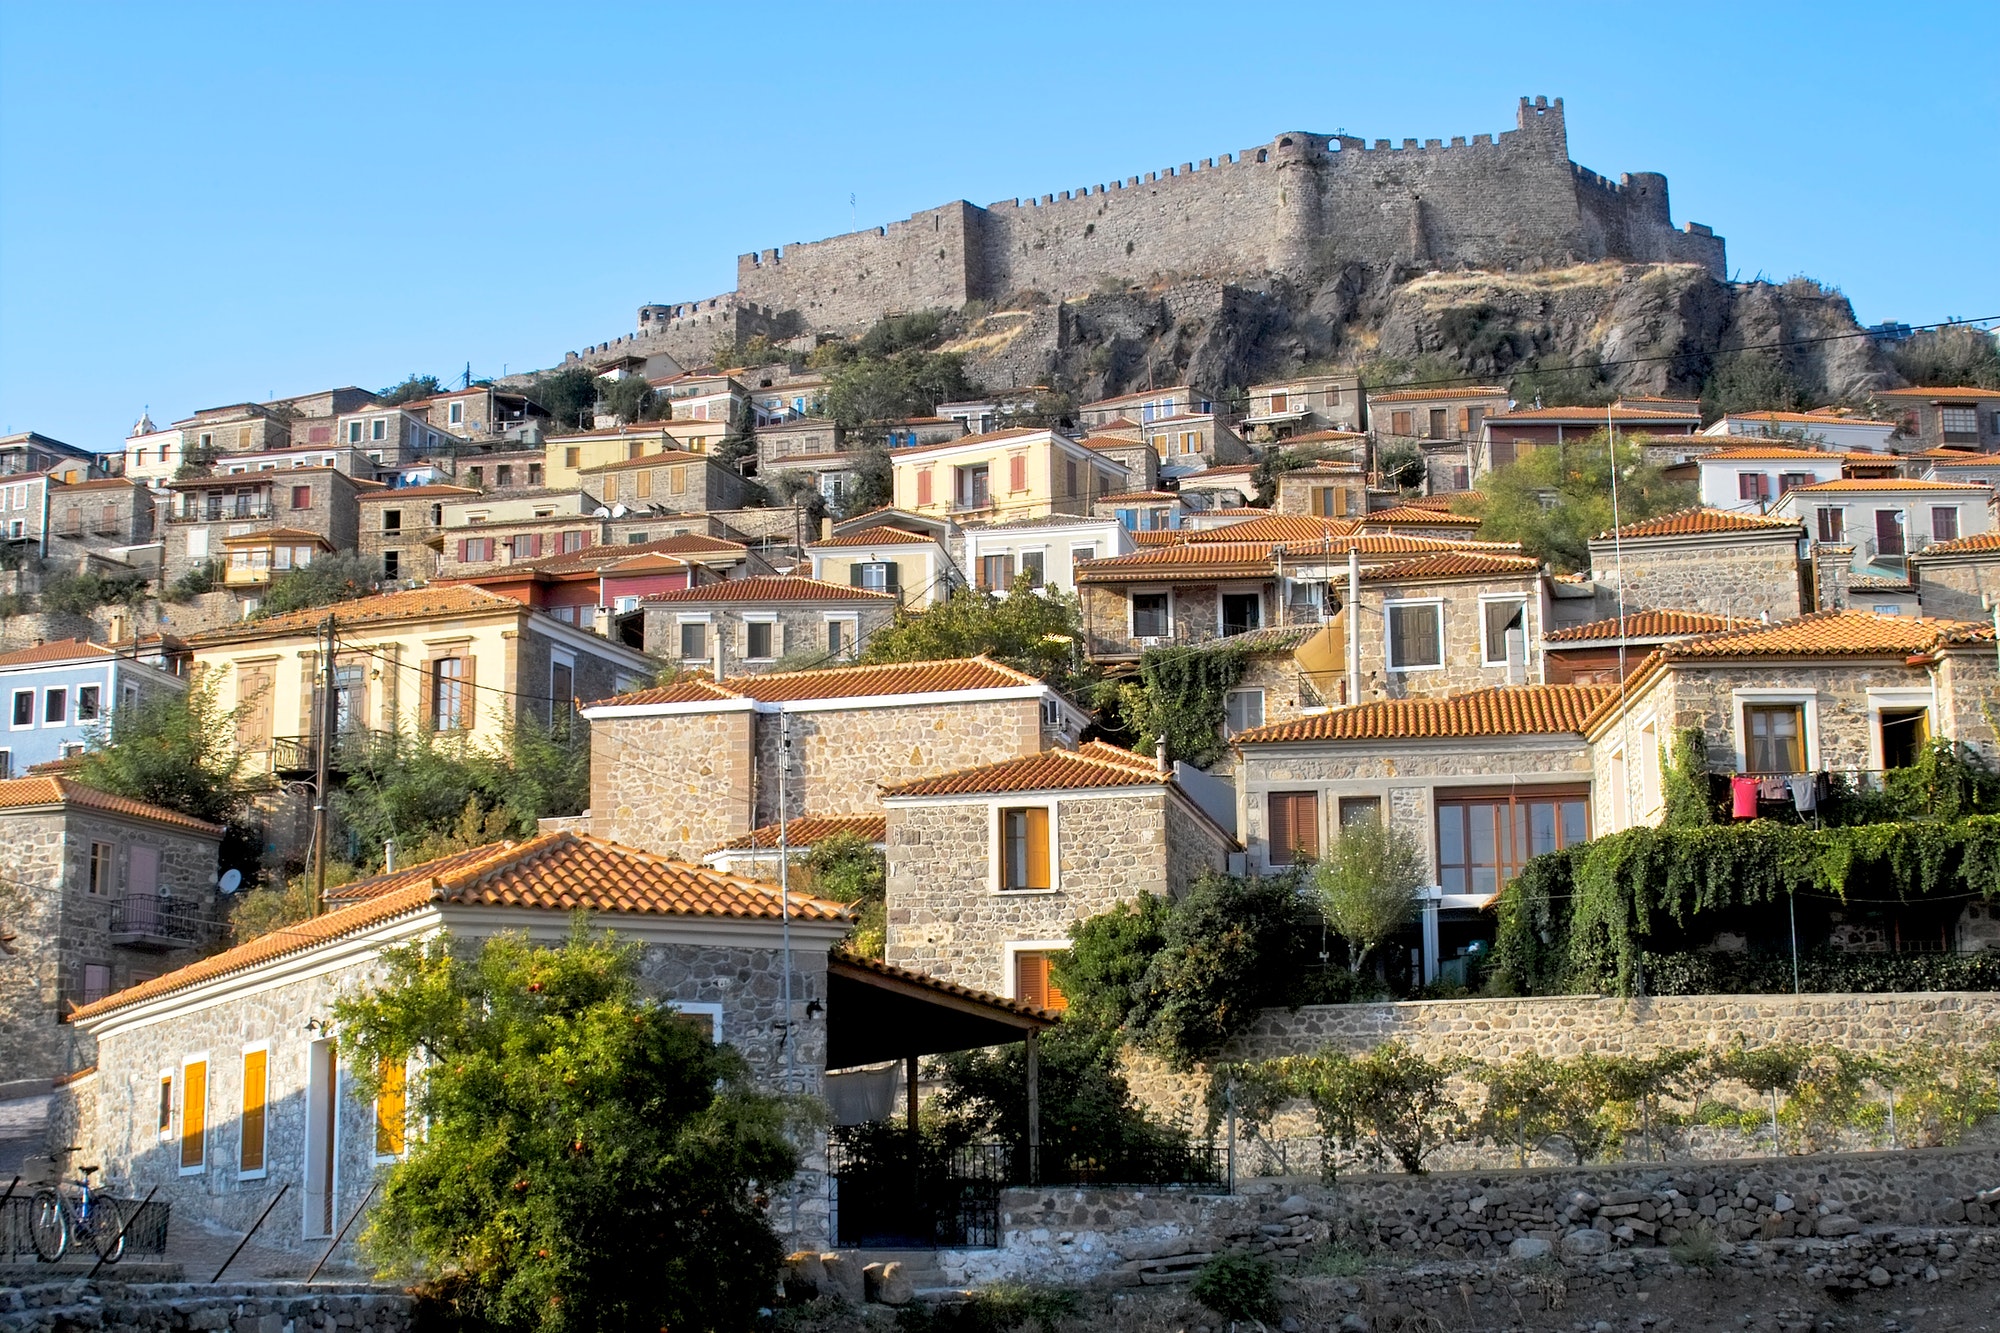 Castle looking over Molyvos village on Lesbos, Greece. Homes & houses on the hill.